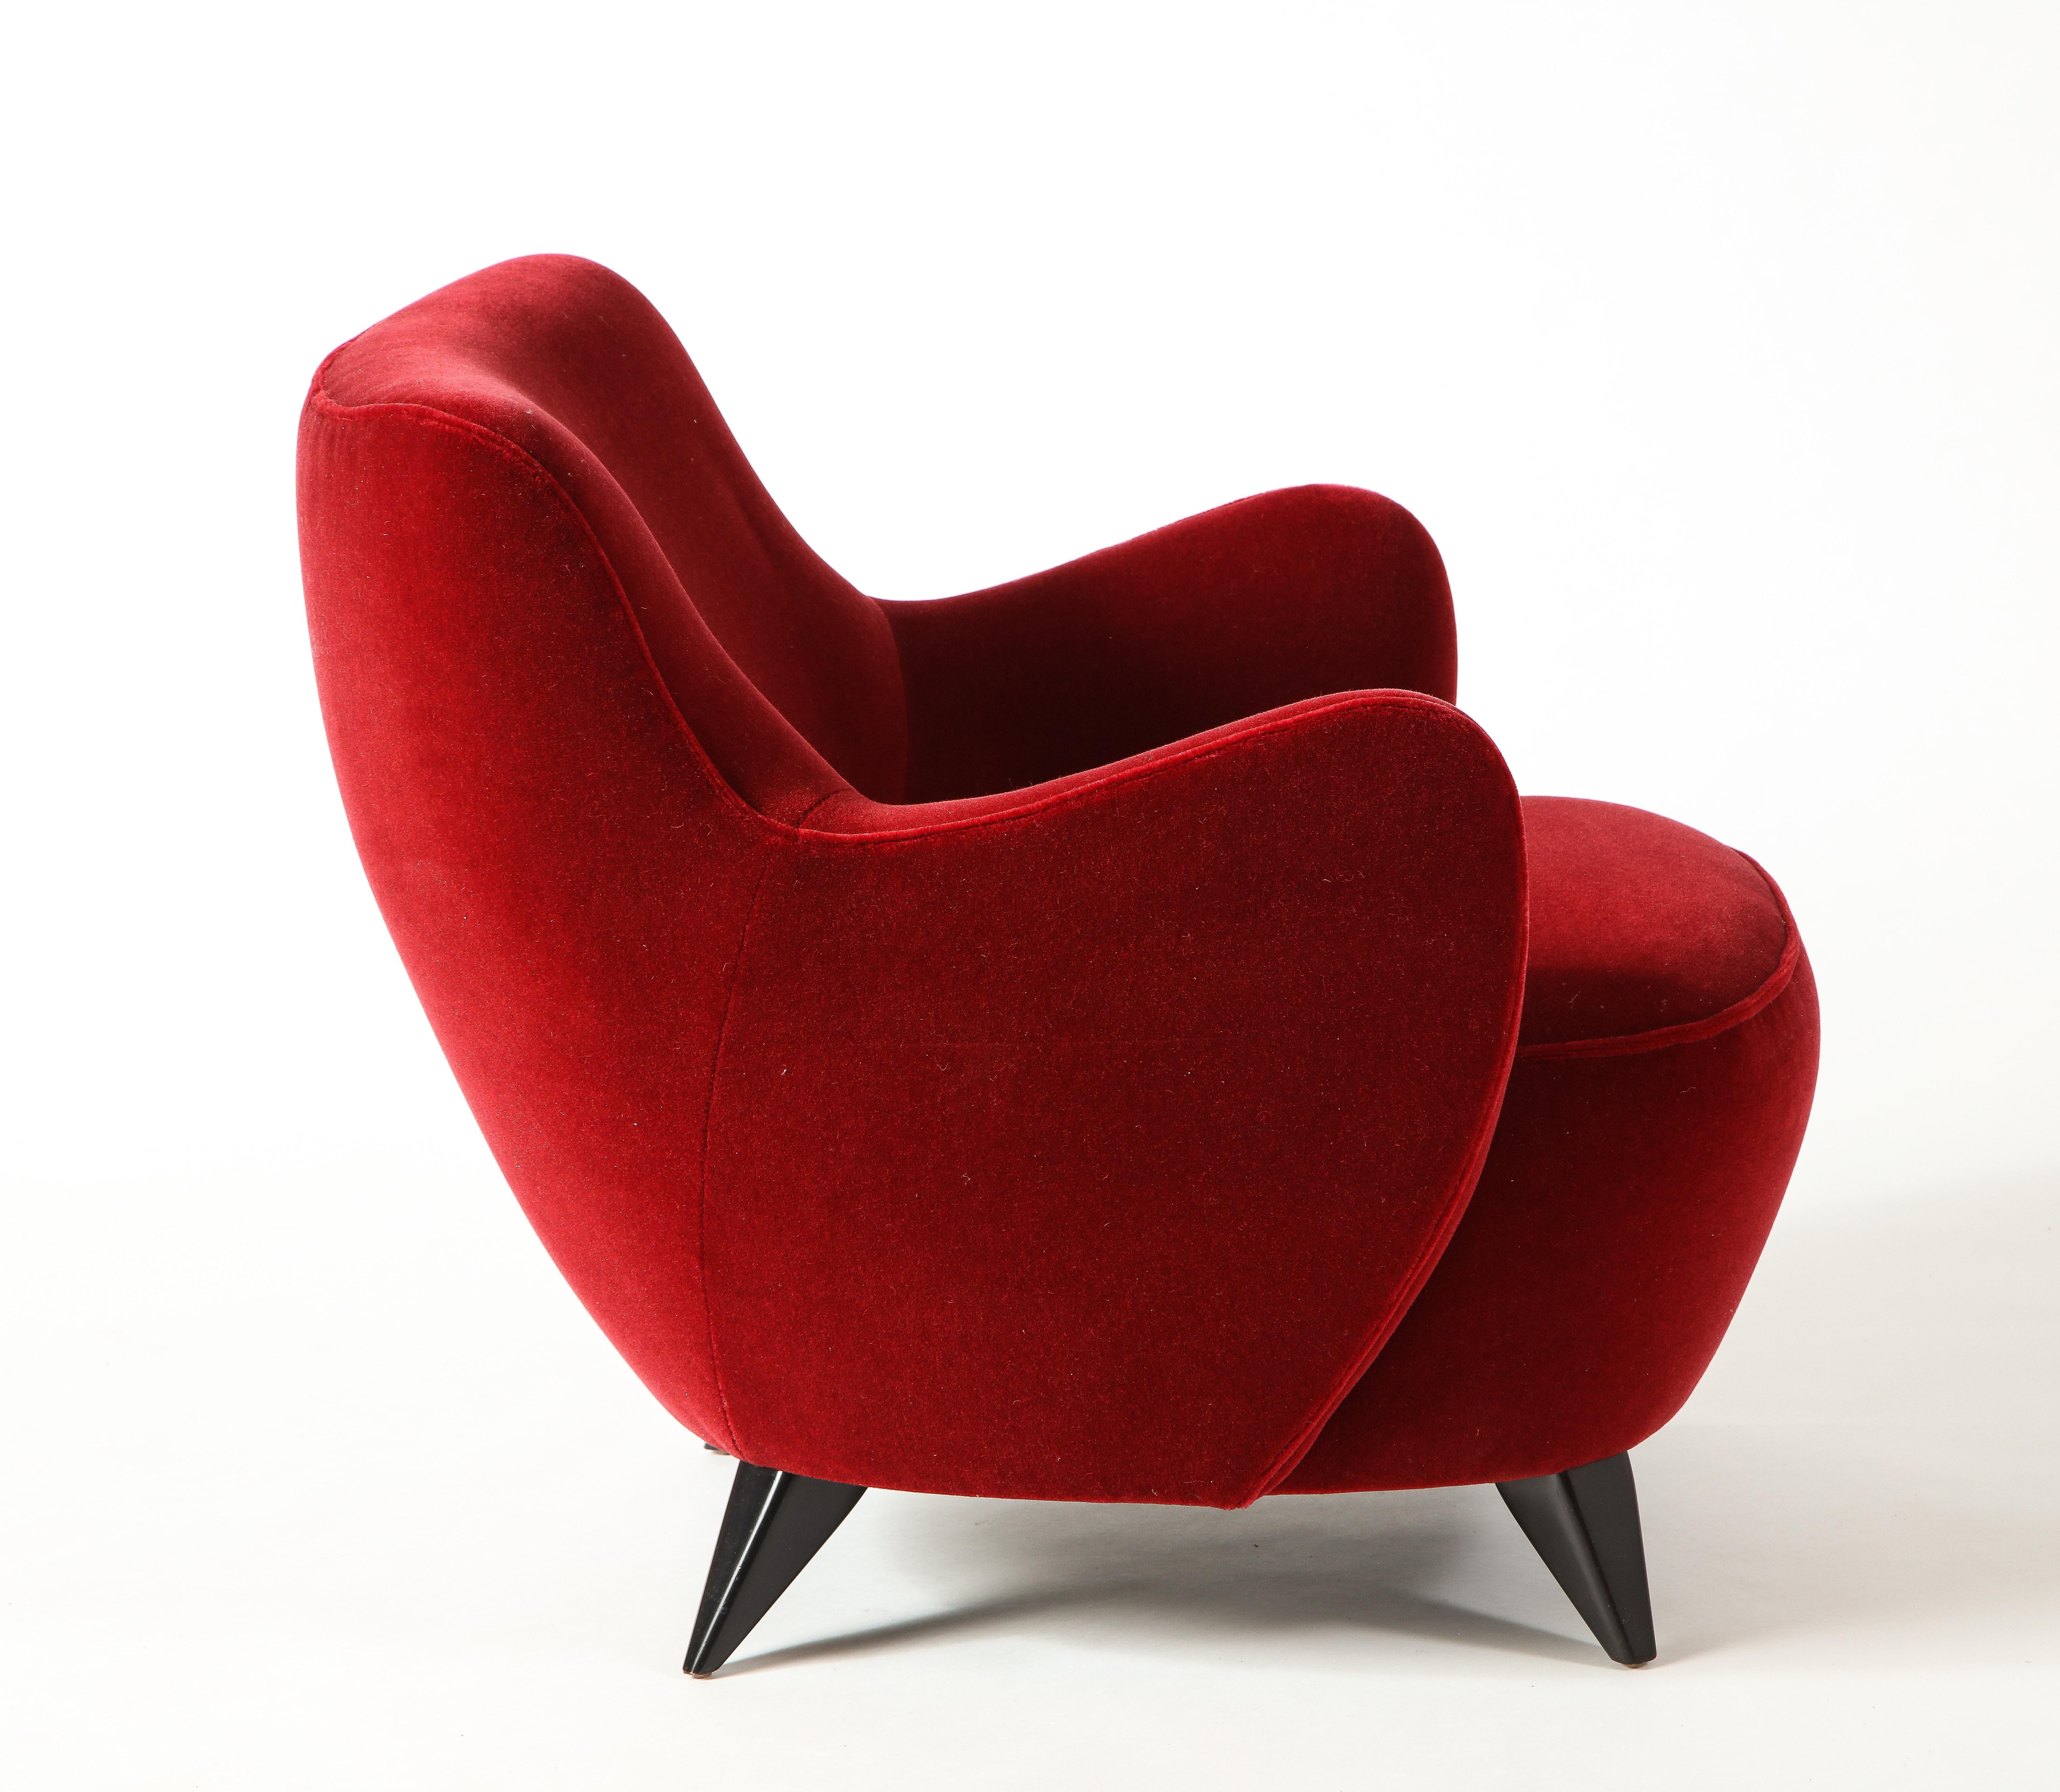 Wood Vladimir Kagan Barrel Chair in Red Mohair Upholstery with Ebony Base